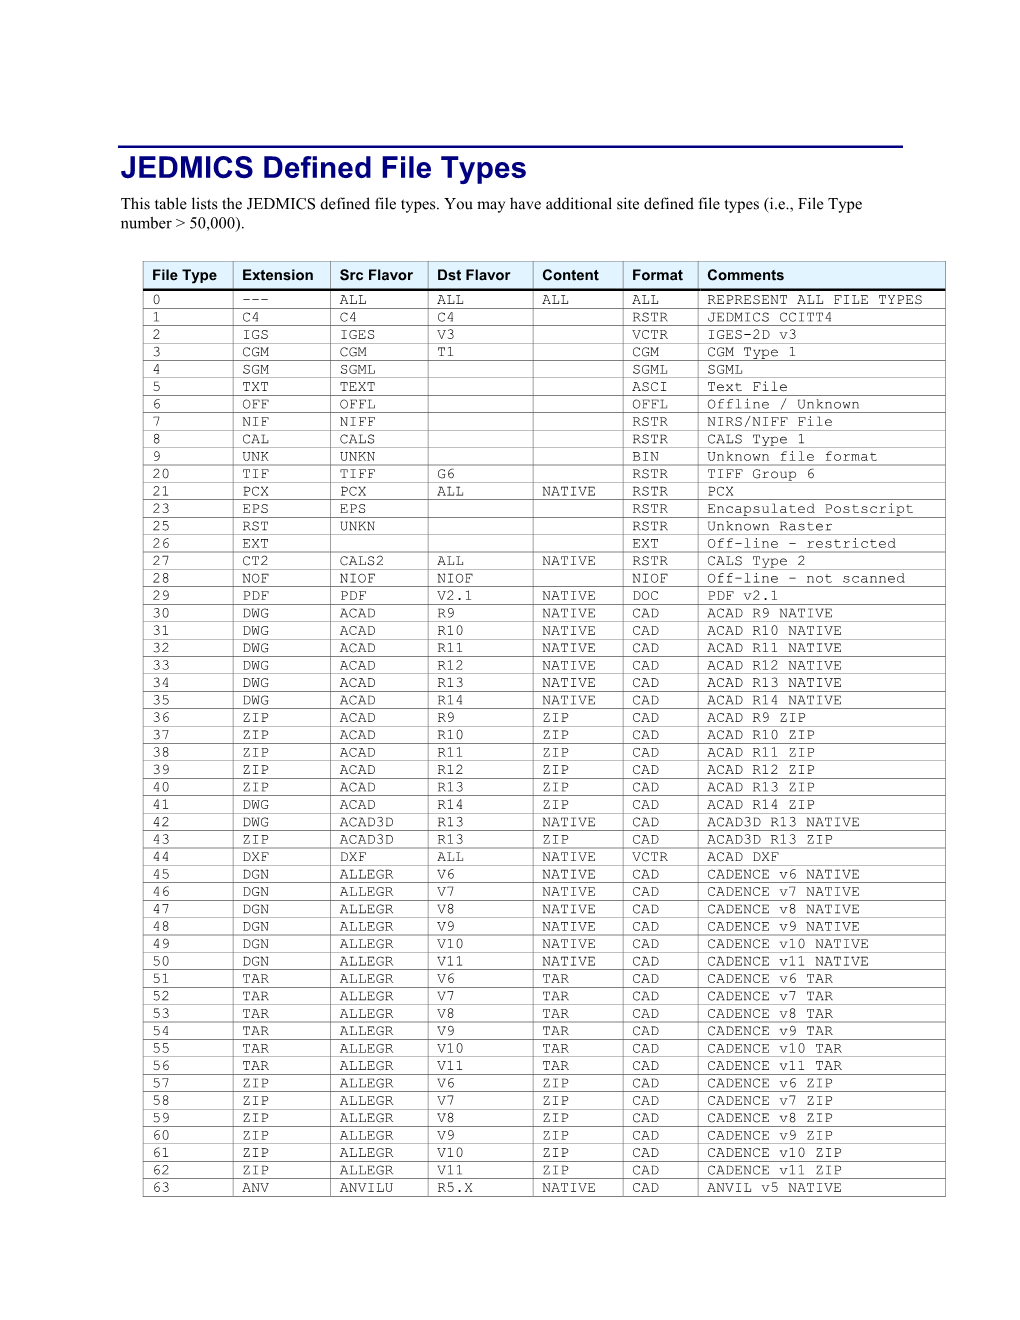 JEDMICS Defined File Types This Table Lists the JEDMICS Defined File Types